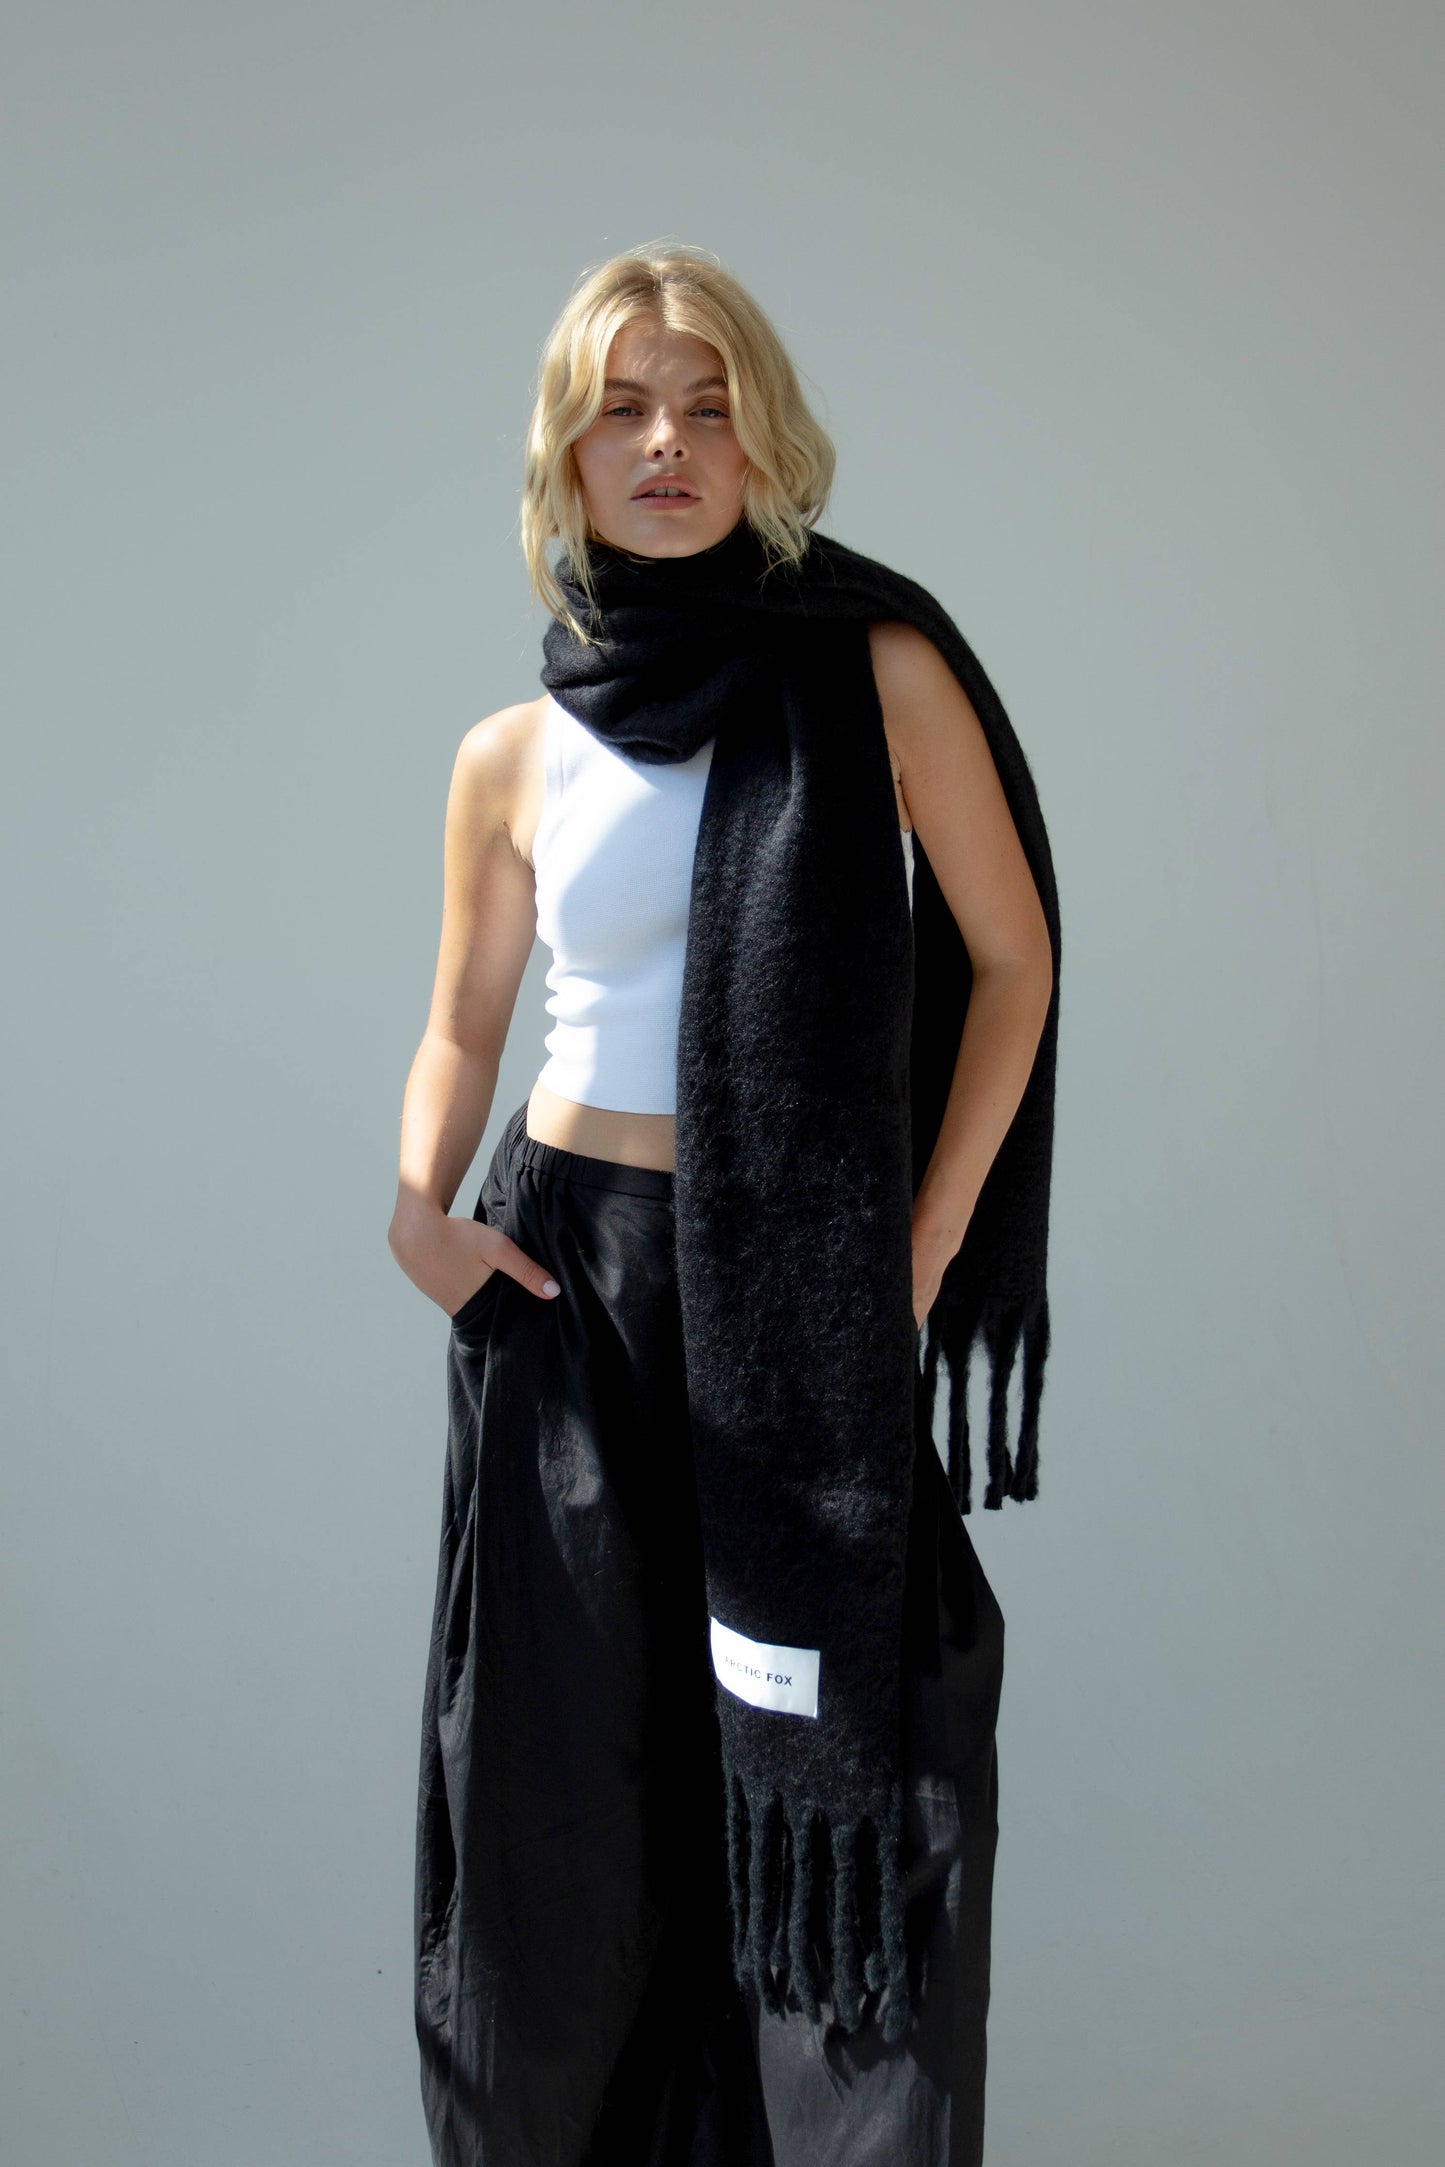 The Luna Scarf - 100% Recycled